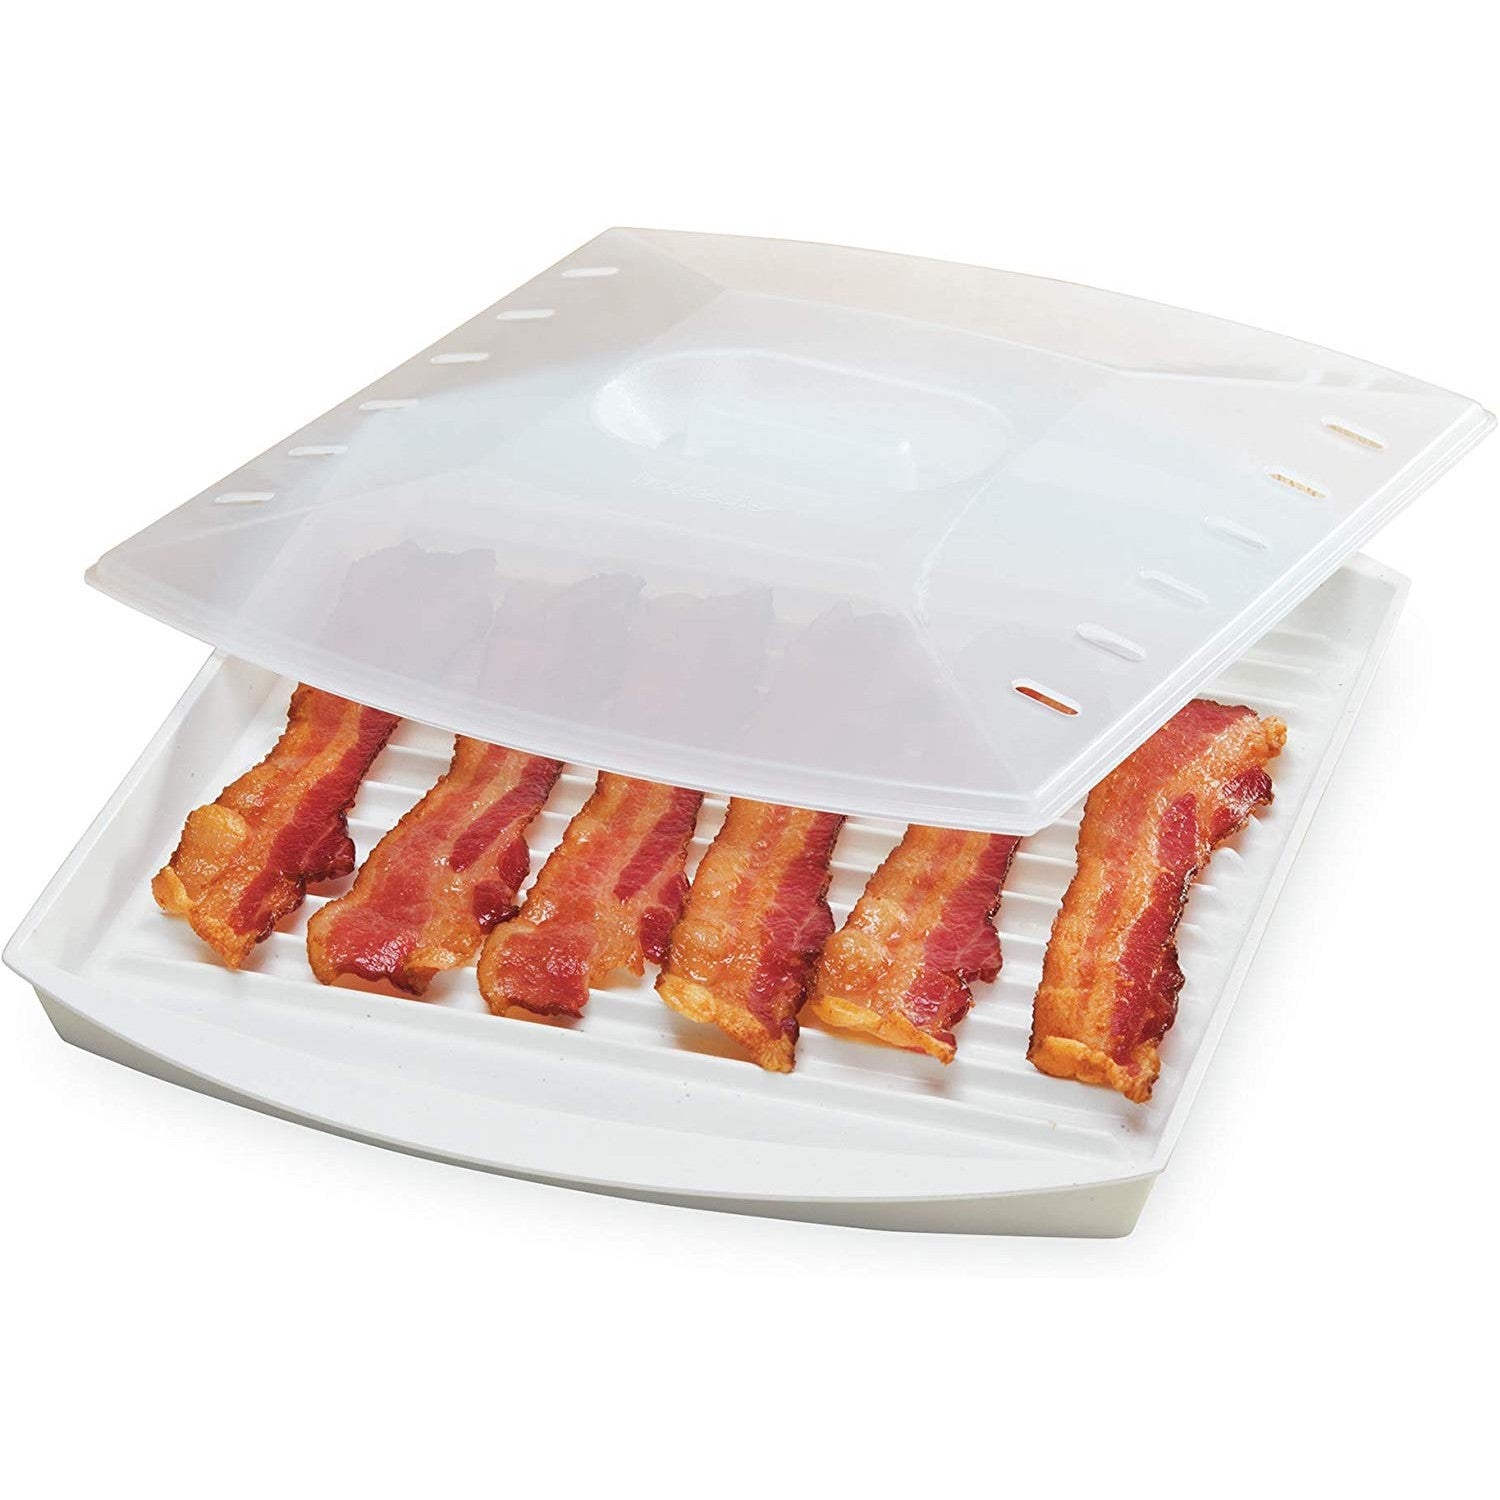 Microwave Bacon Cooker –